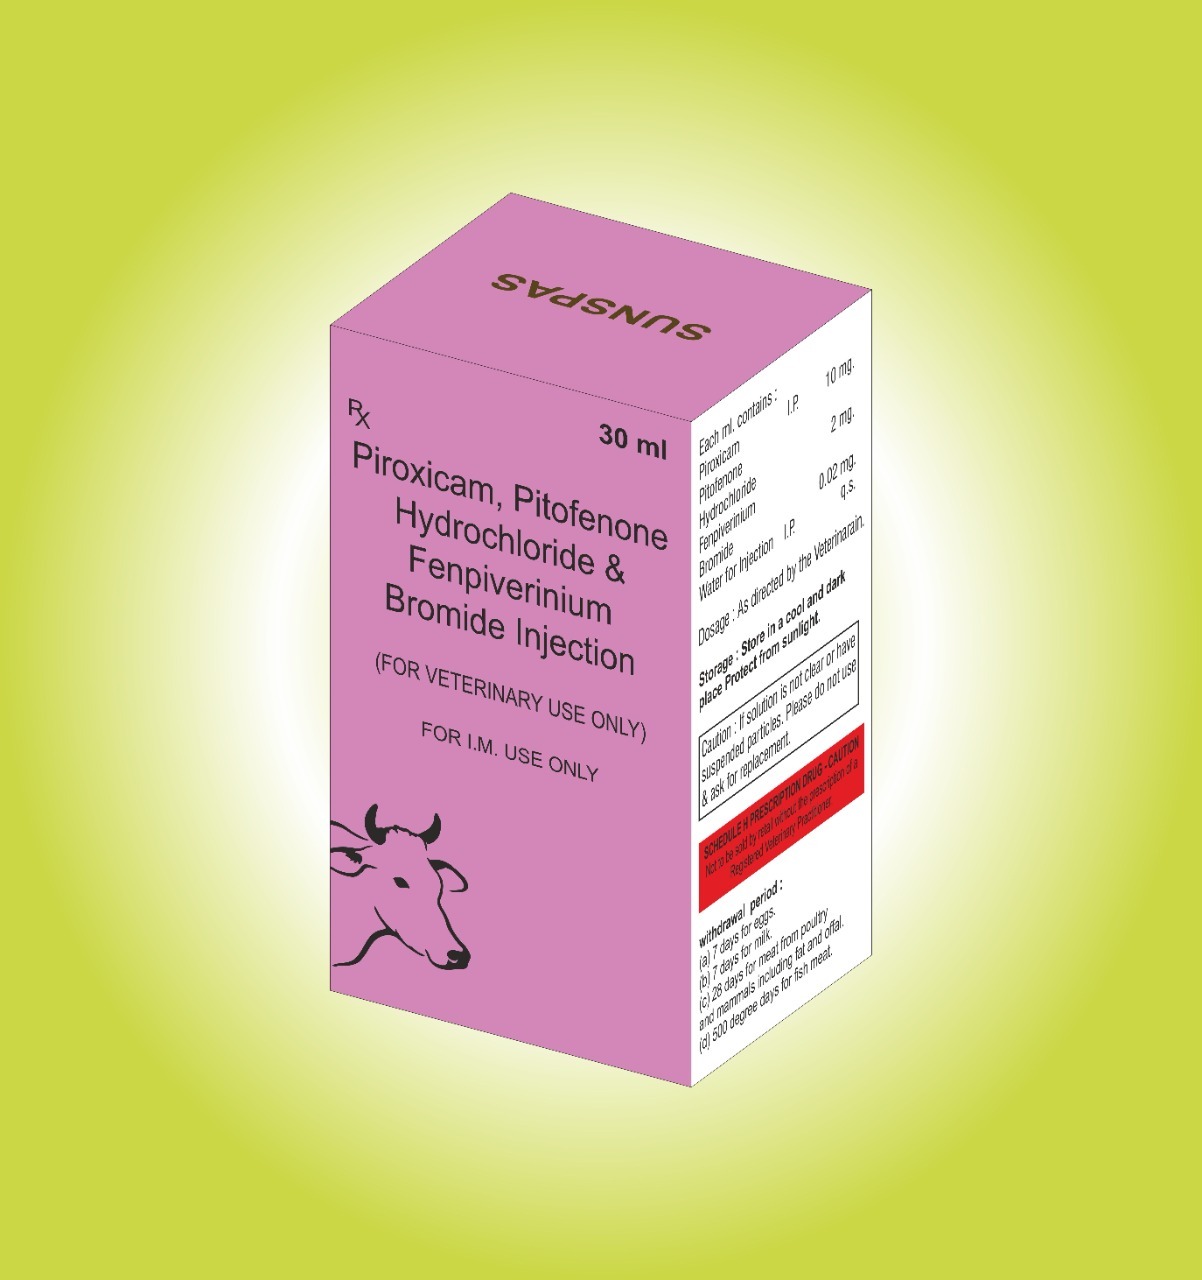 PIROXICAM PITOFENONE HYDROCHLORIDE AND FENPIVERINIUM BROMIDE INJECTION IN THIRD PARTY MANUFACTURING